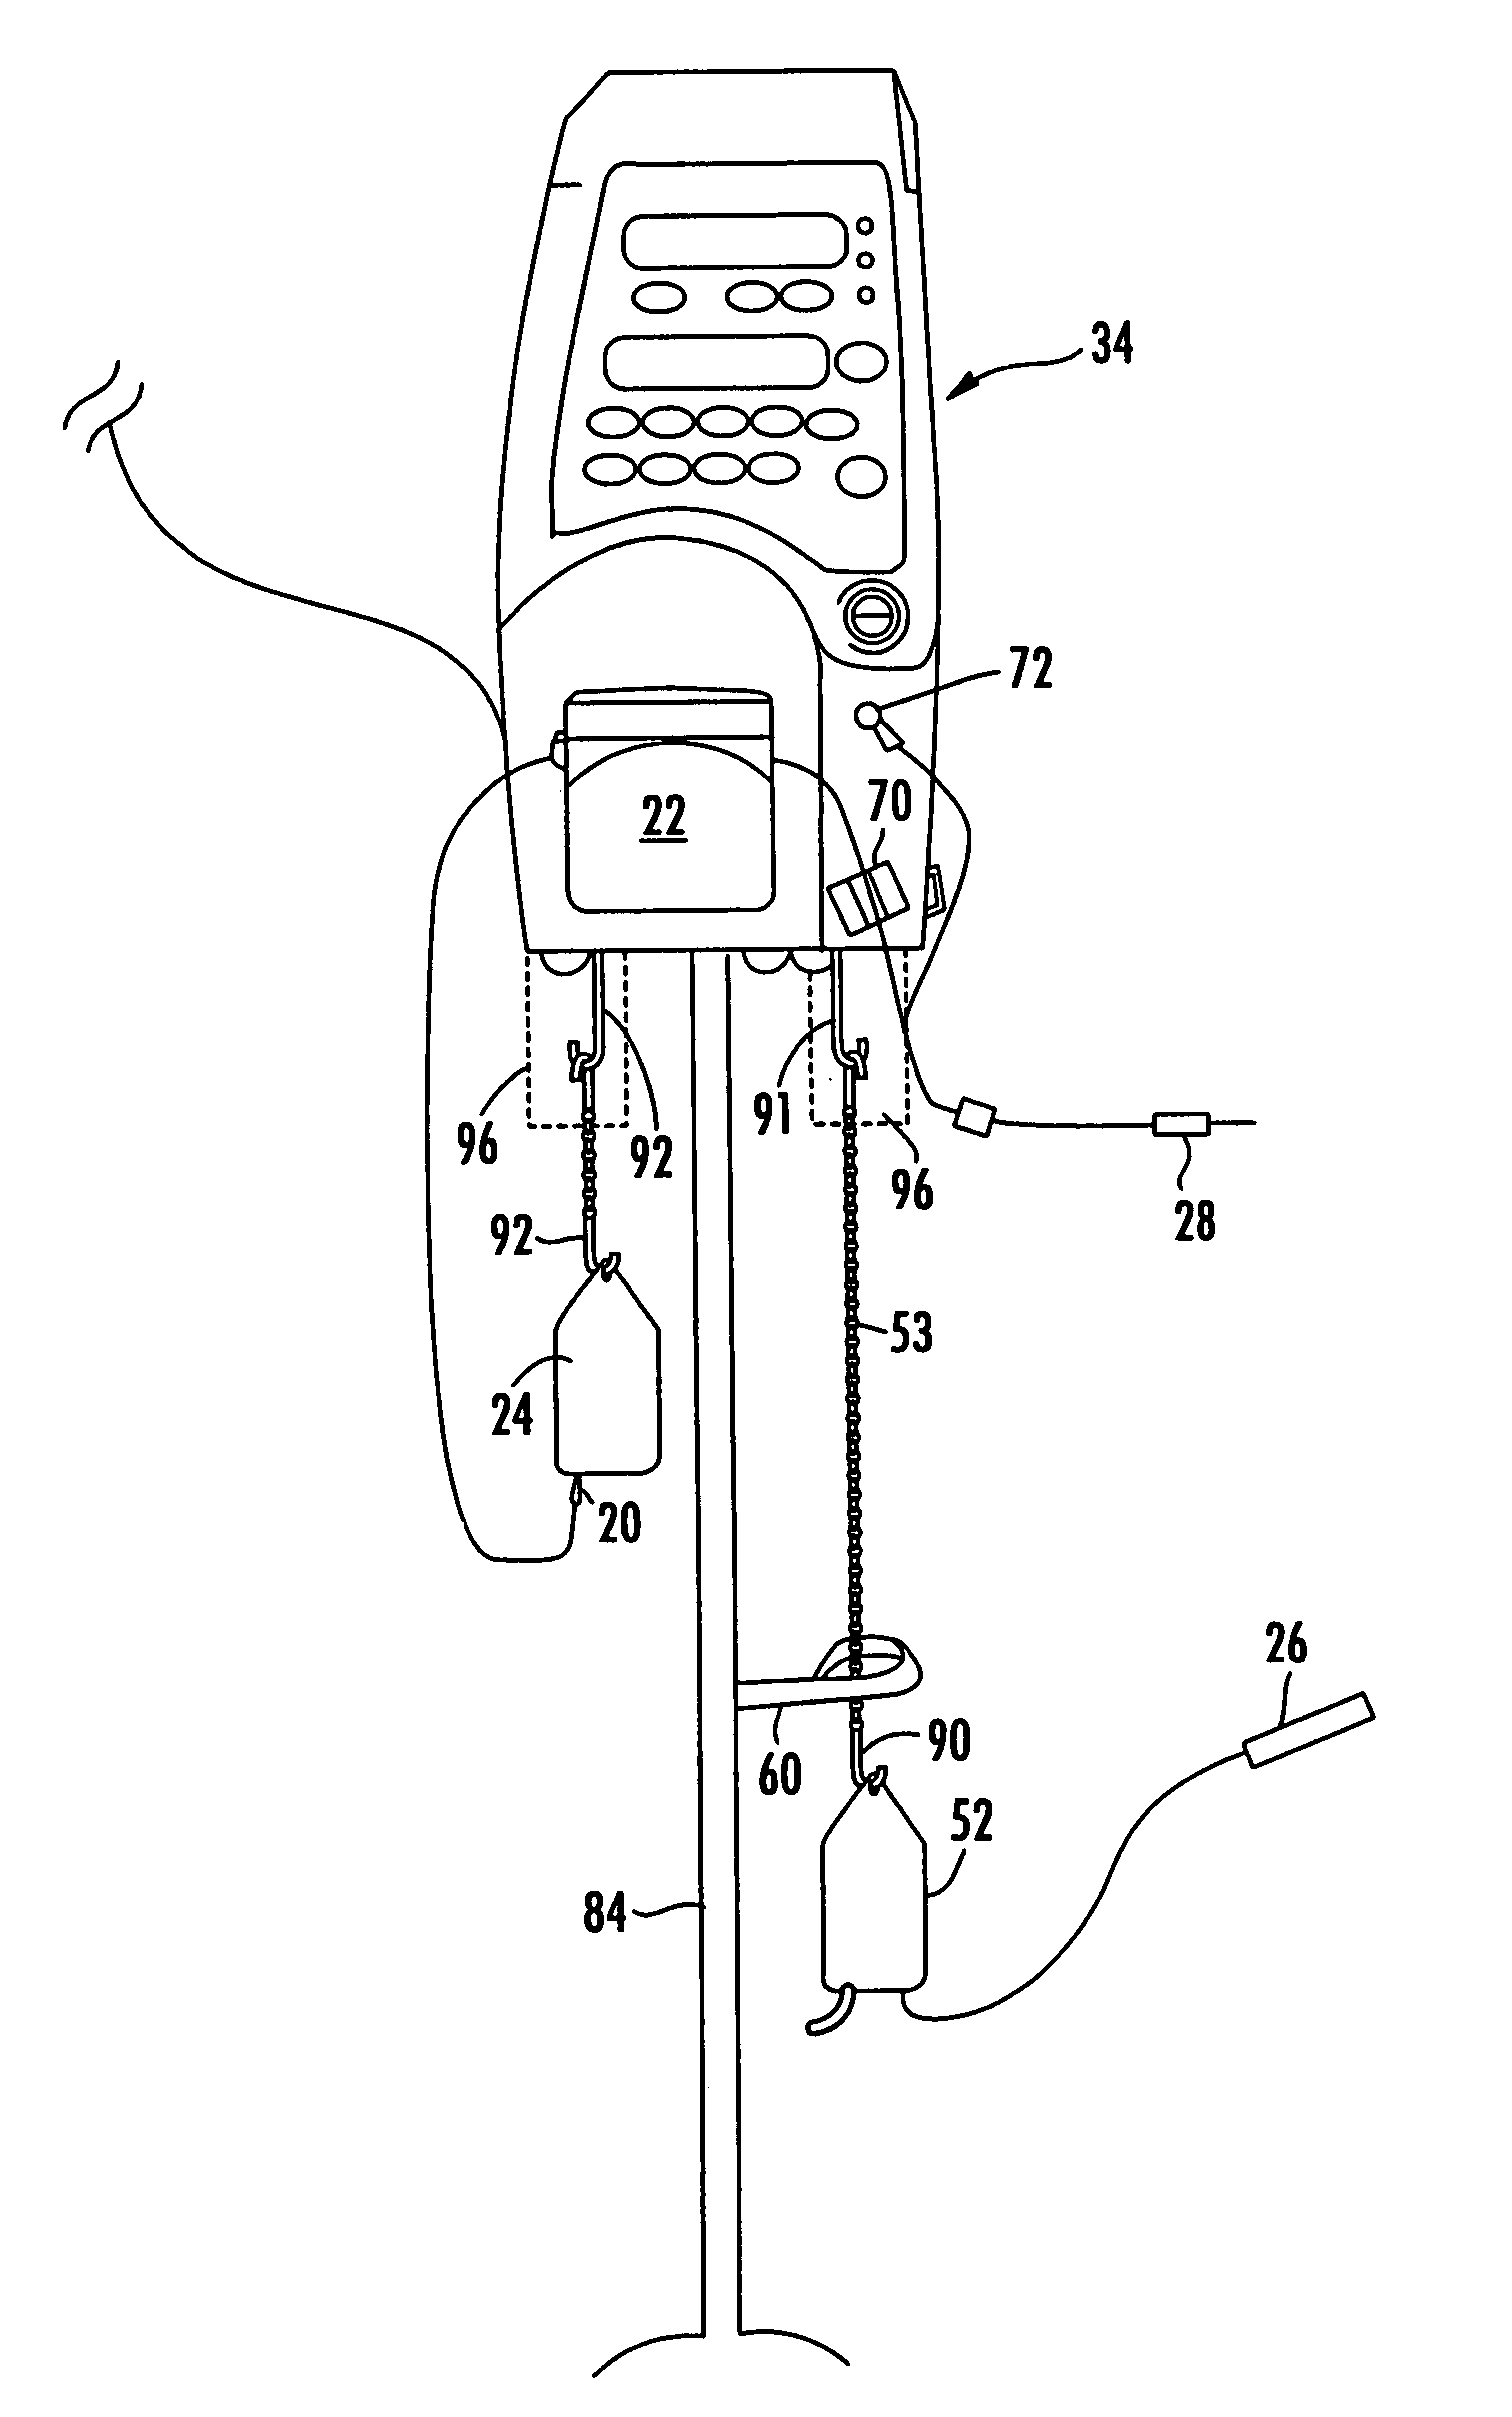 Patient hydration monitoring and maintenance system and method for use with administration of a diuretic